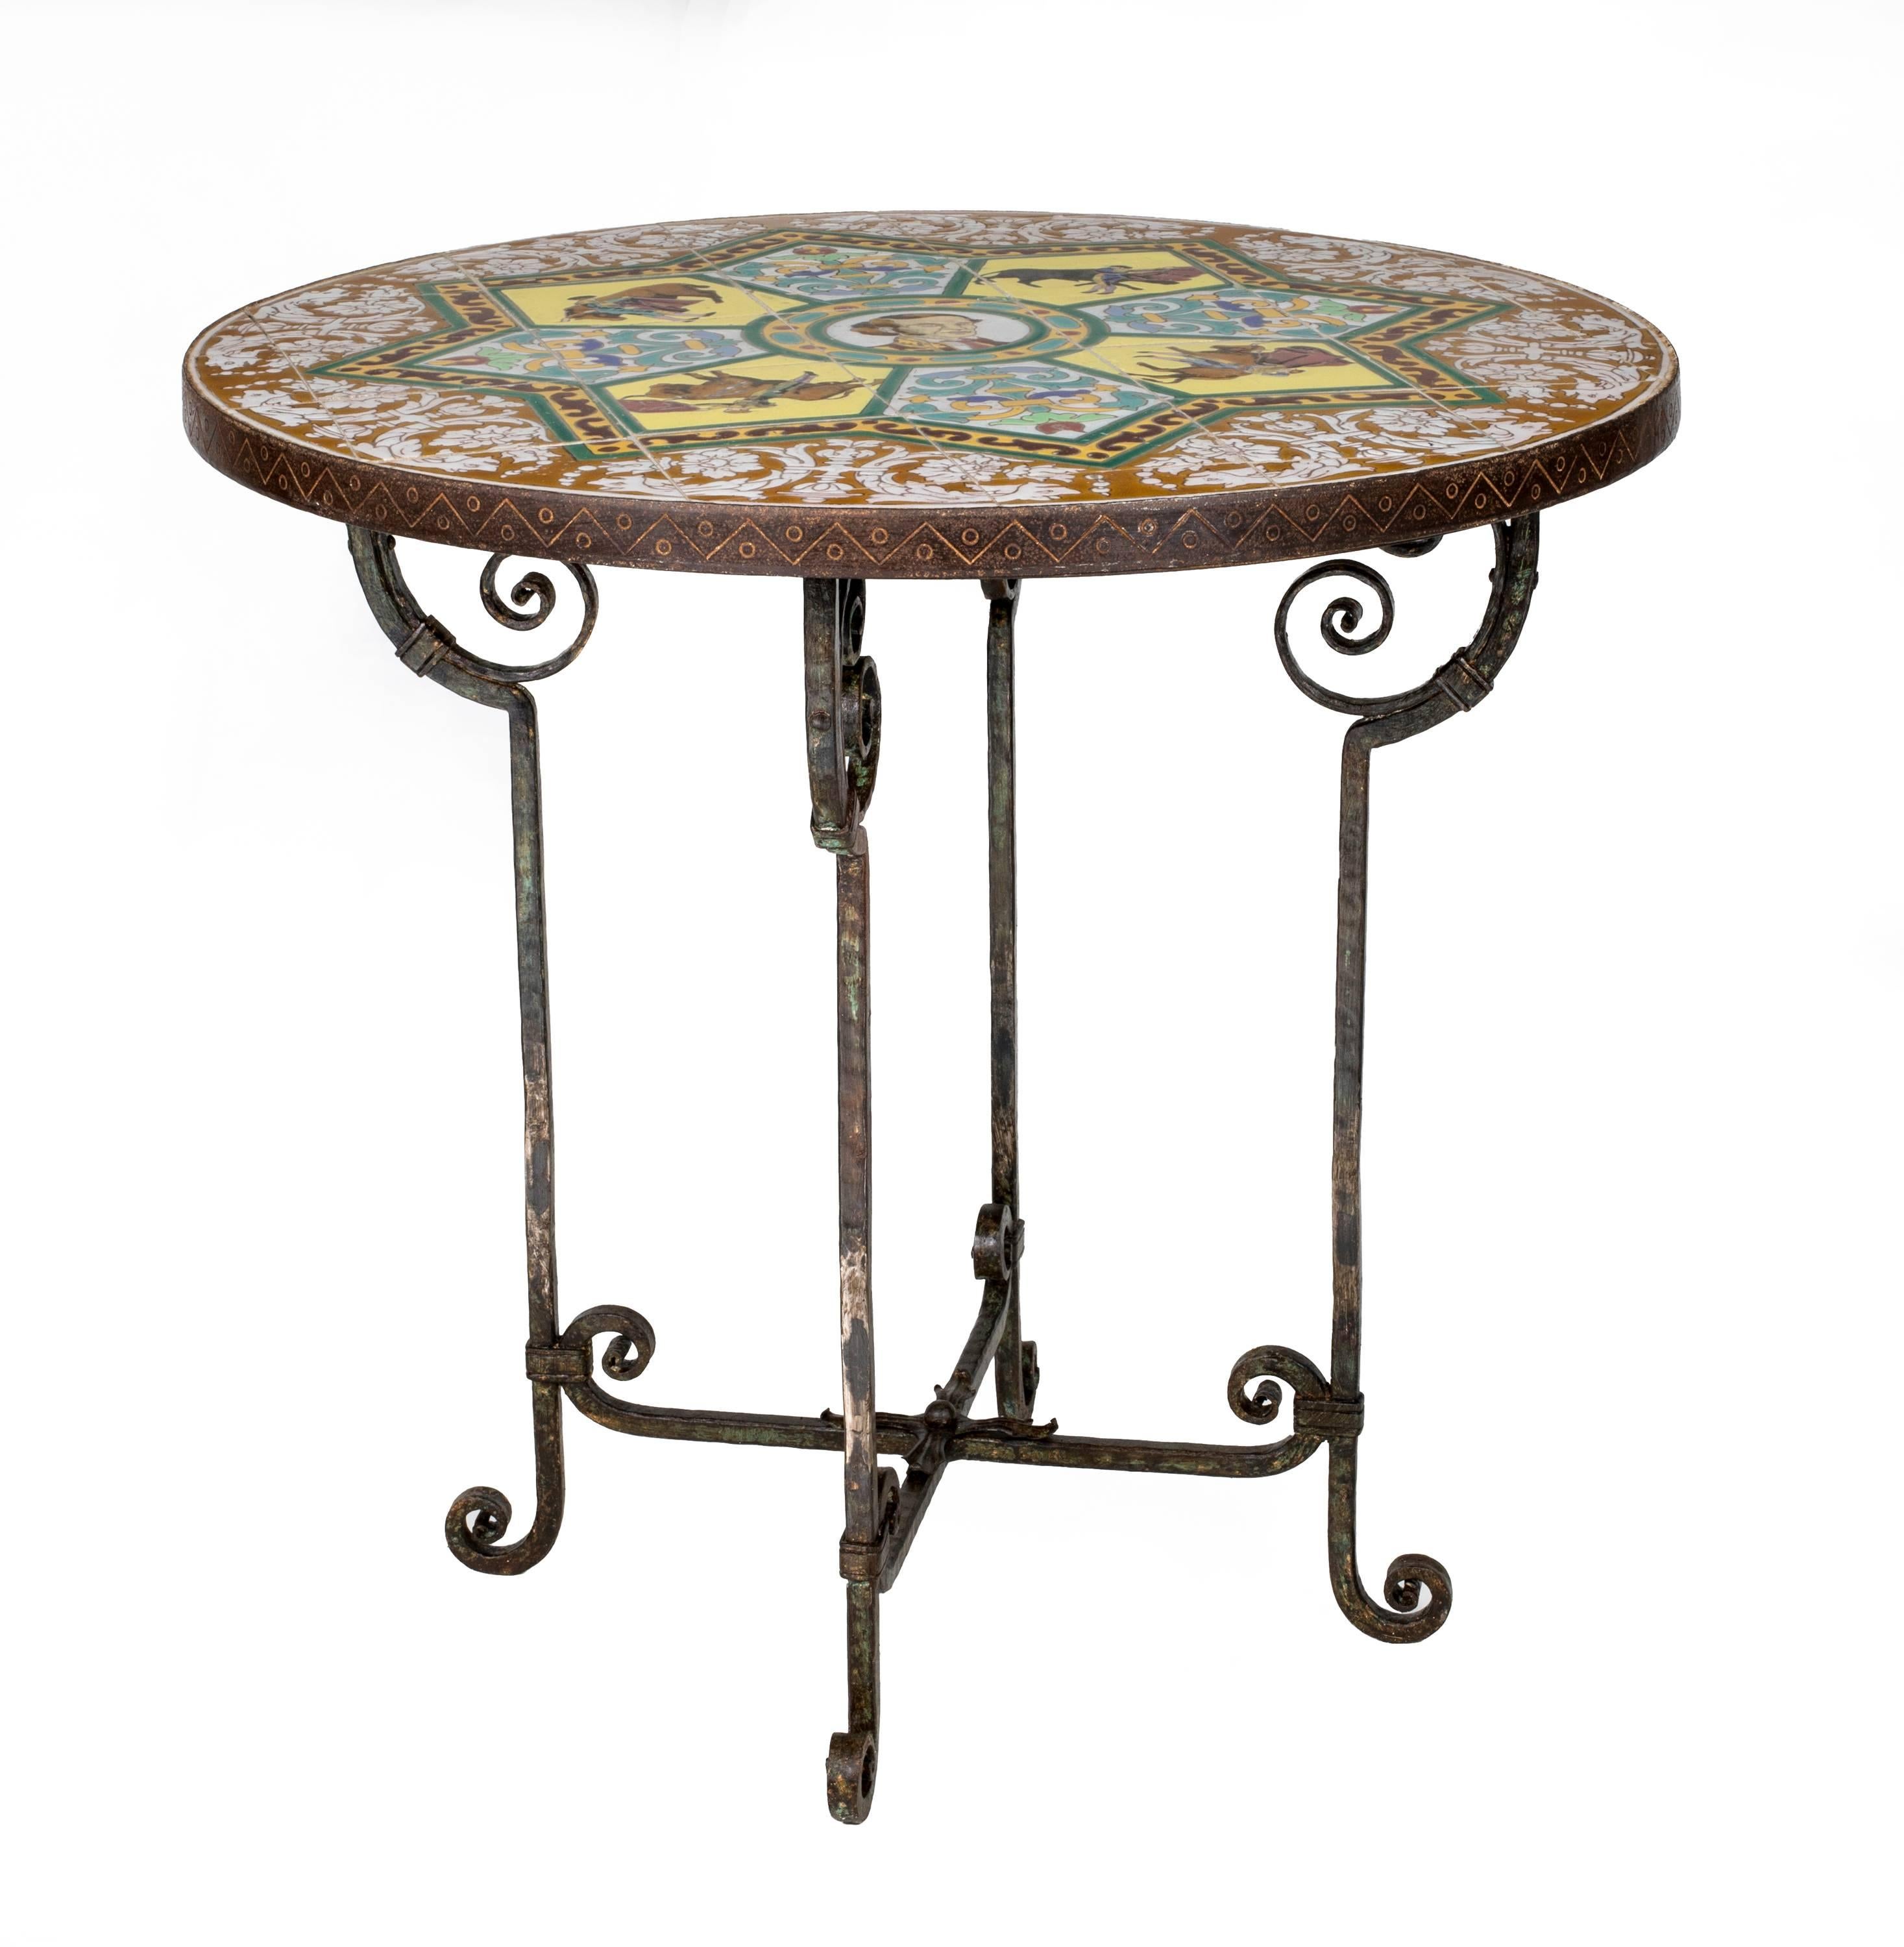 Vintage 1930s Spanish Revival tiled round table. Very decorative, brightly colored tile top with Spanish bull fighter motif.   The tiled top is captured with iron trim and supported by hand-wrought iron base. Surface top could be enlarged with a